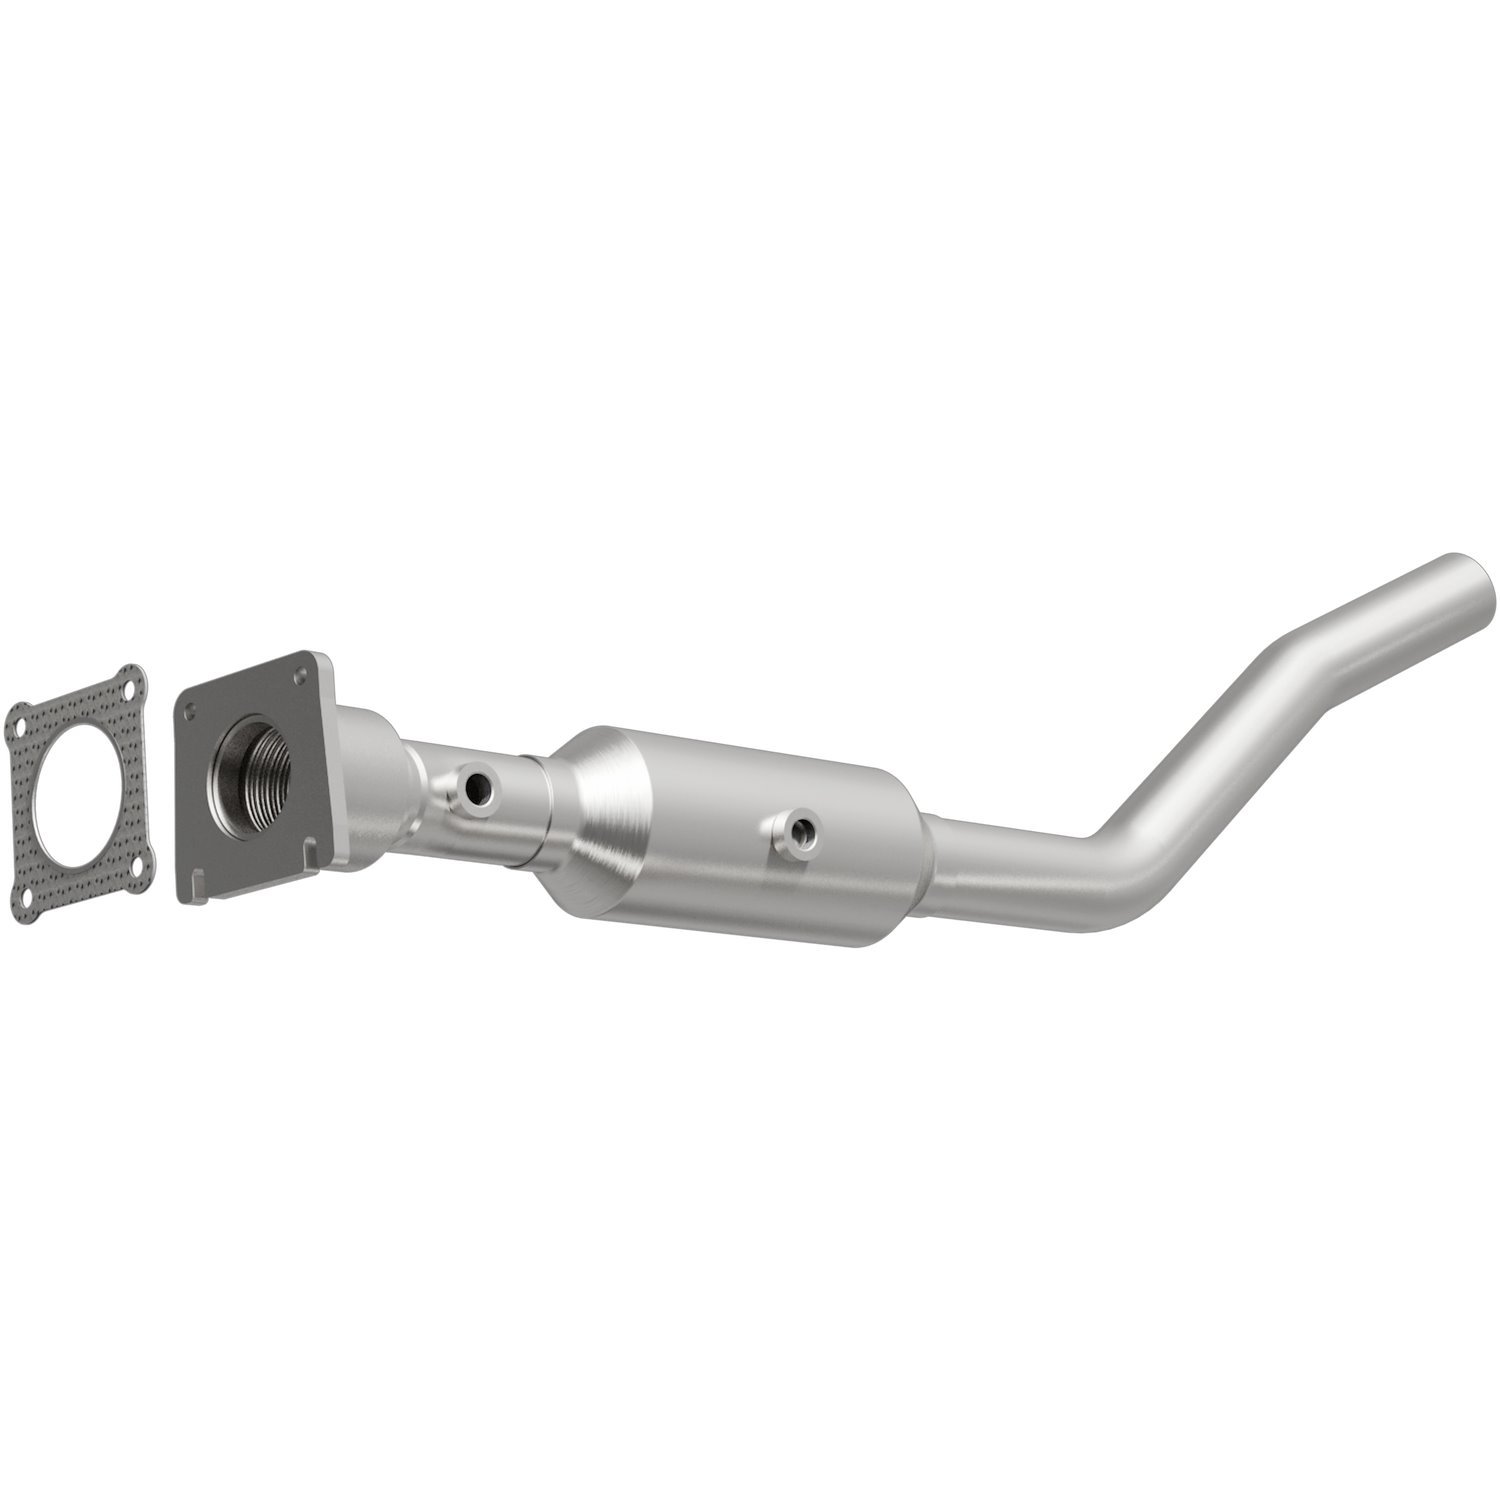 5661192 California-Grade CARB-Compliant Direct-Fit Catalytic Converter for Chrysler/Dodge/Jeep